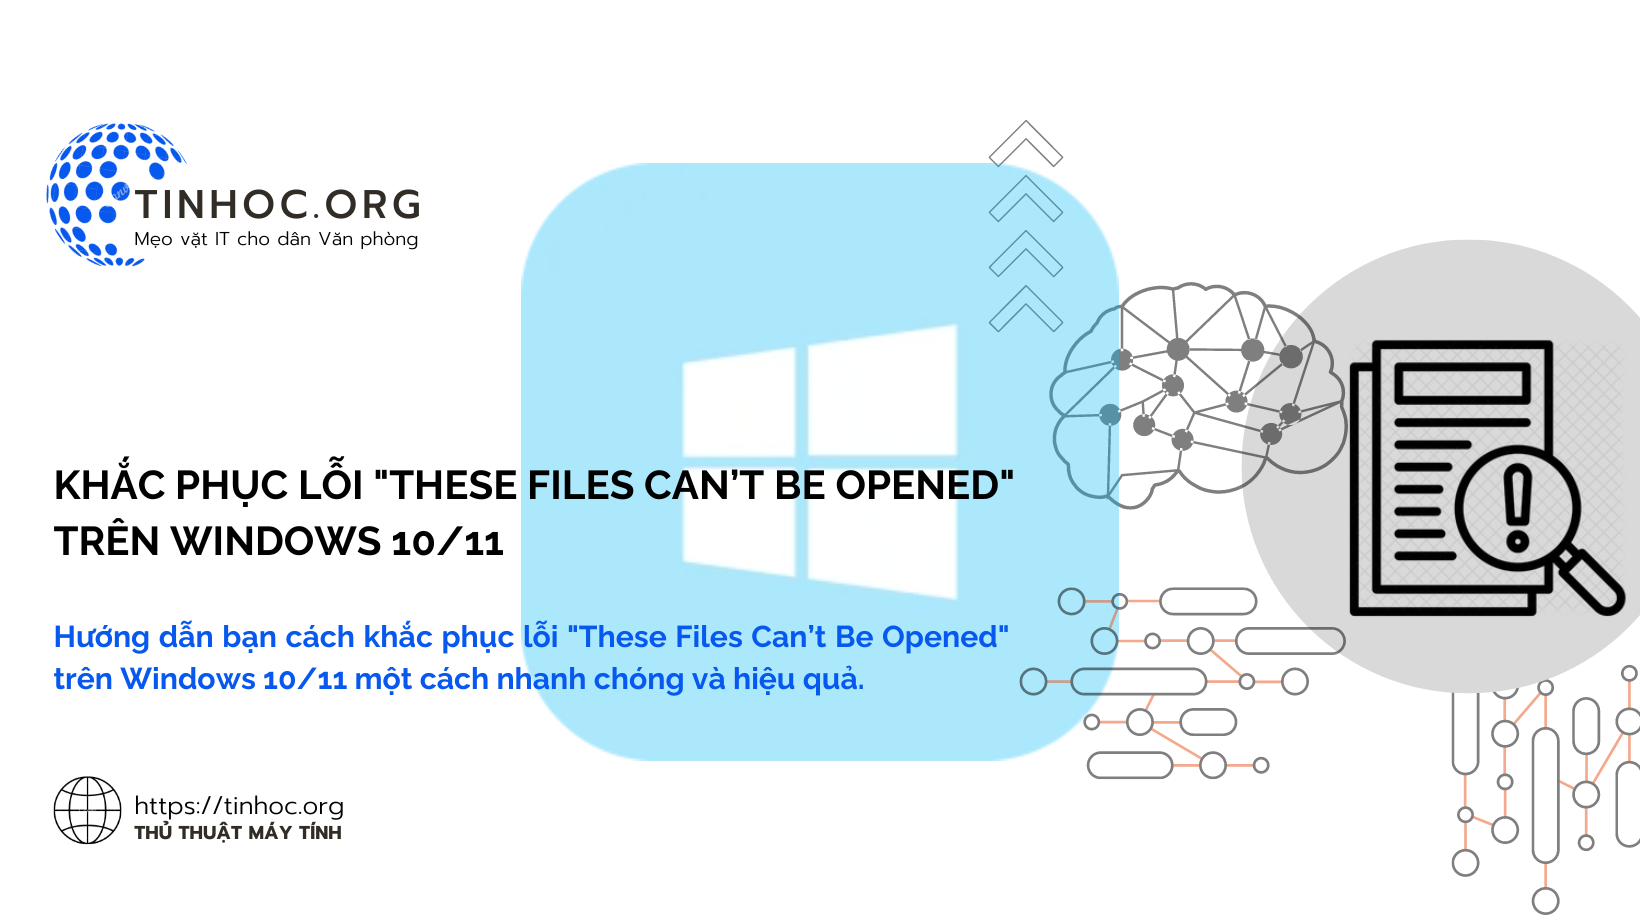 Khắc phục lỗi "These Files Can’t Be Opened" trên Windows 10/11